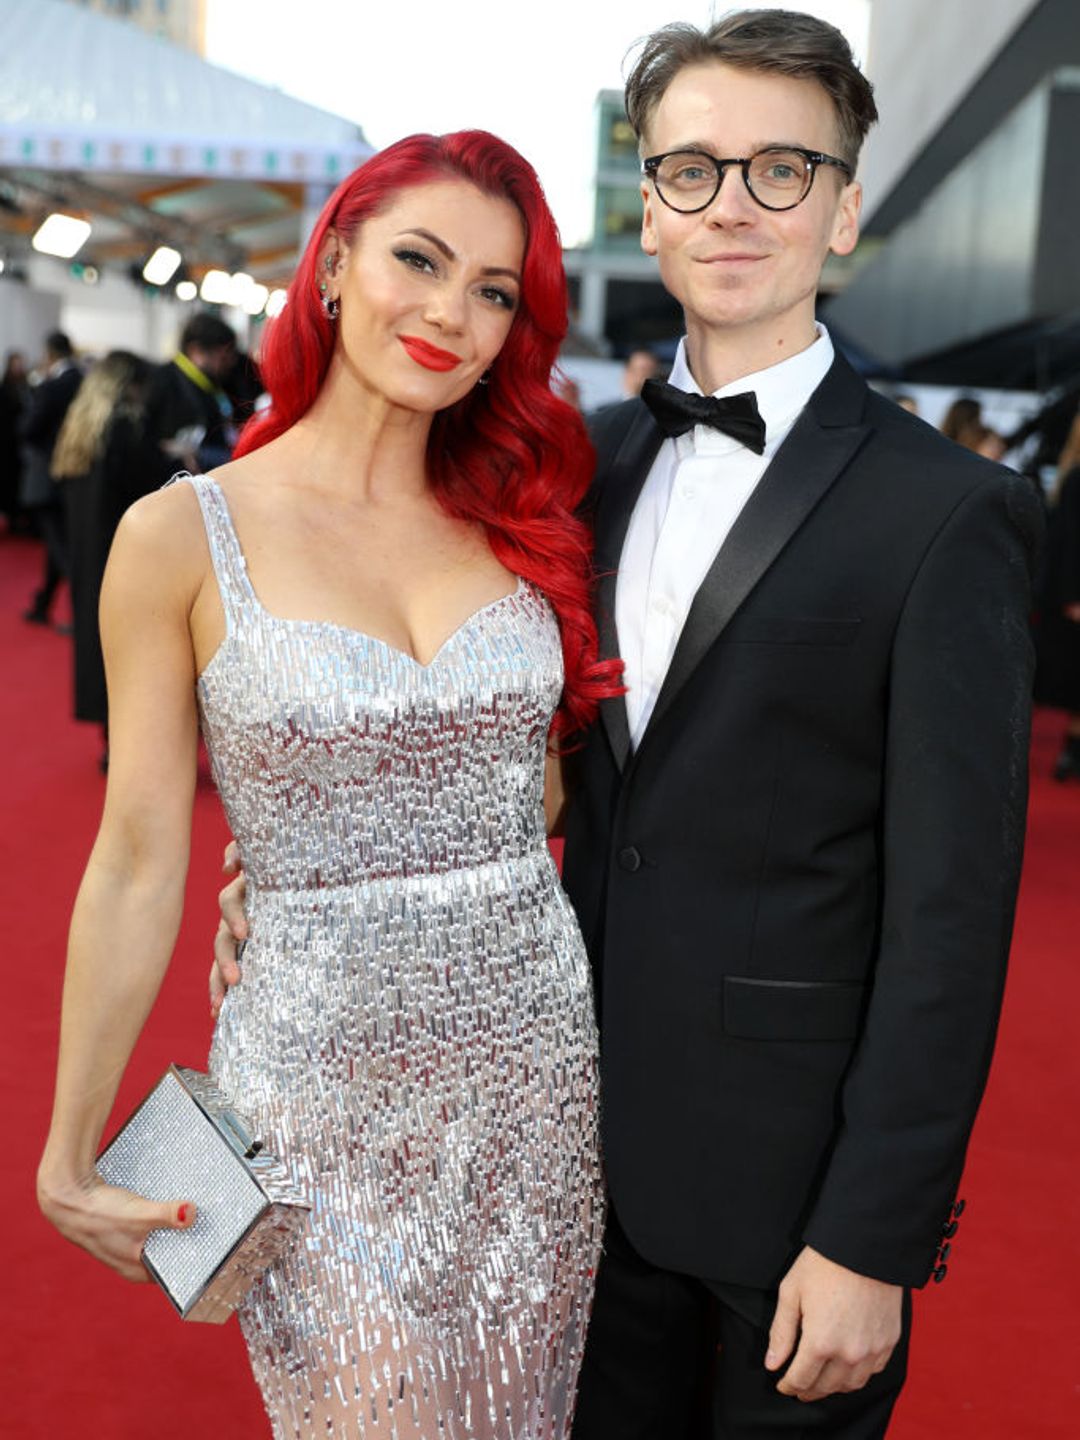 Dianne Buswell wearing a silver beaded gown and Joe Sugg in a black tux as they attend the EE BAFTA Film Awards 2023